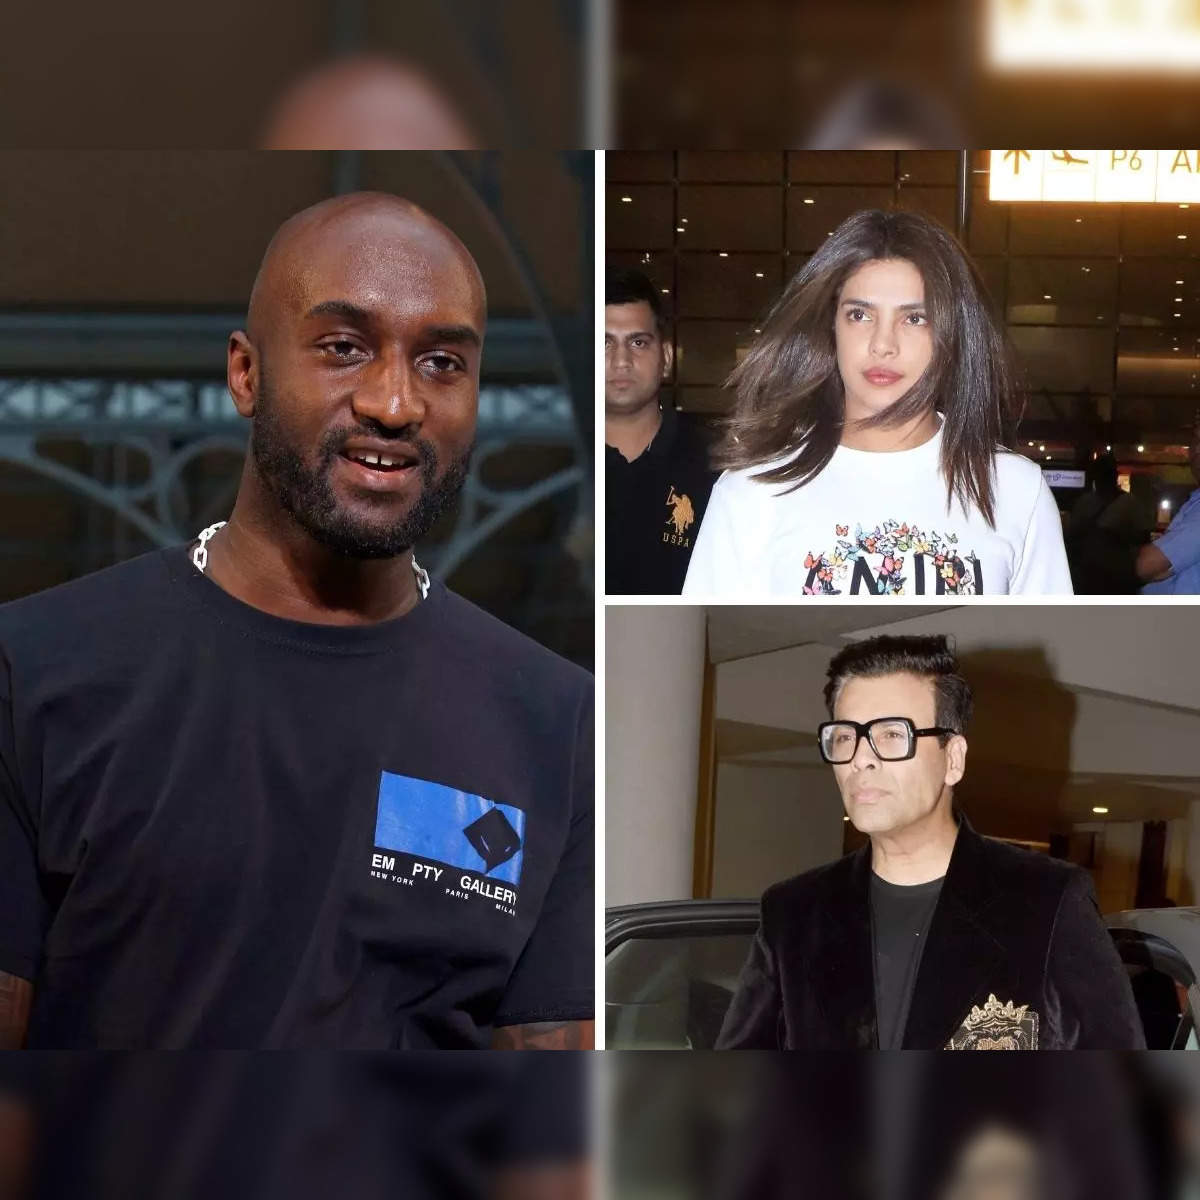 Virgil Abloh: Louis Vuitton designer who founded fashion label Off-White  dies aged 41, Ents & Arts News